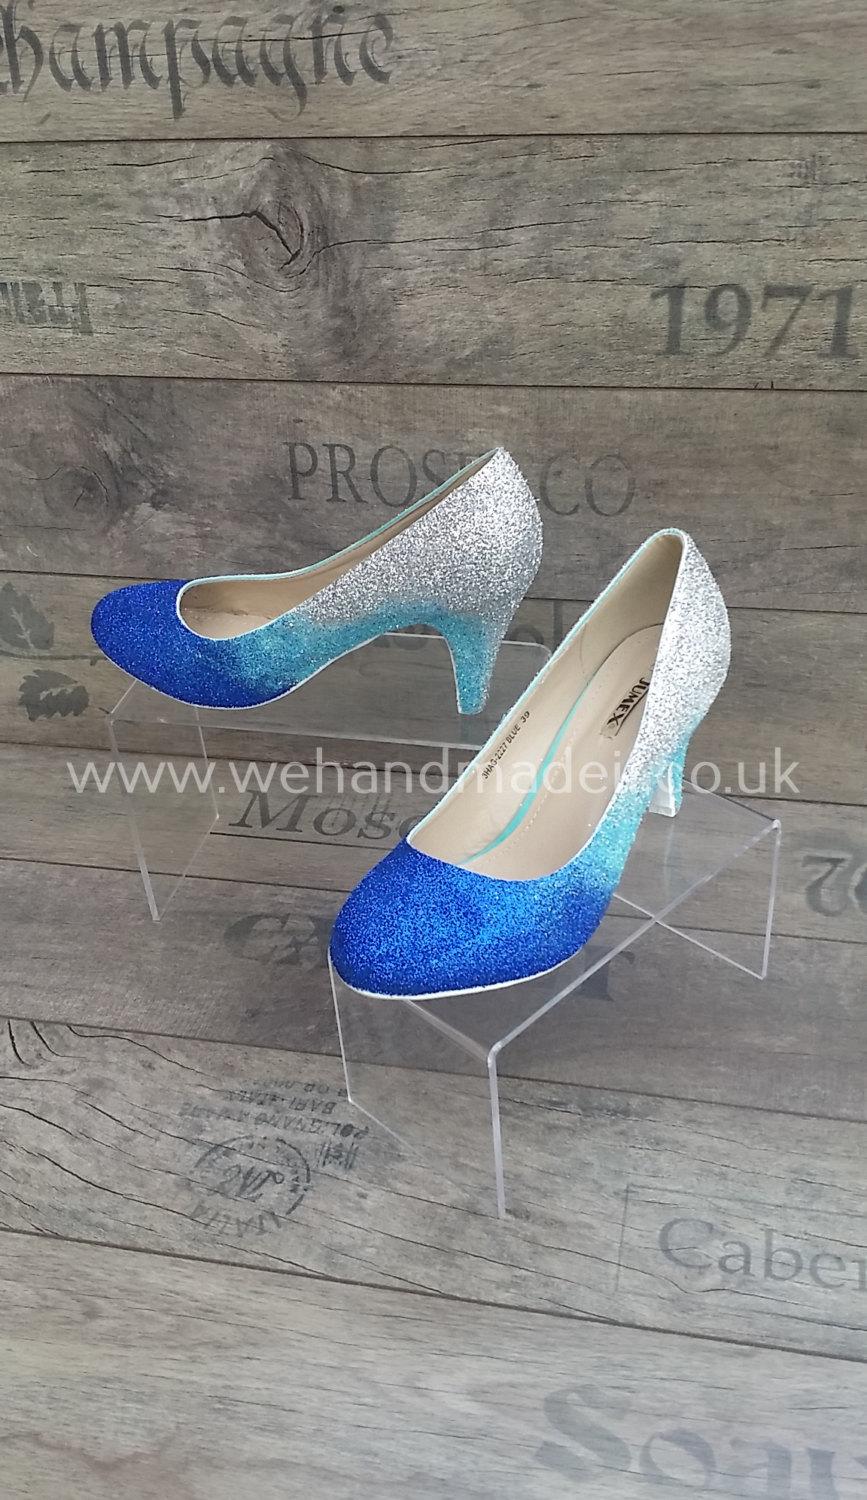 Свадьба - Custom made blue to silver graded glitter shoes - any style or size.  Wedding shoes, prom shoes, custom glitter shoes made to order